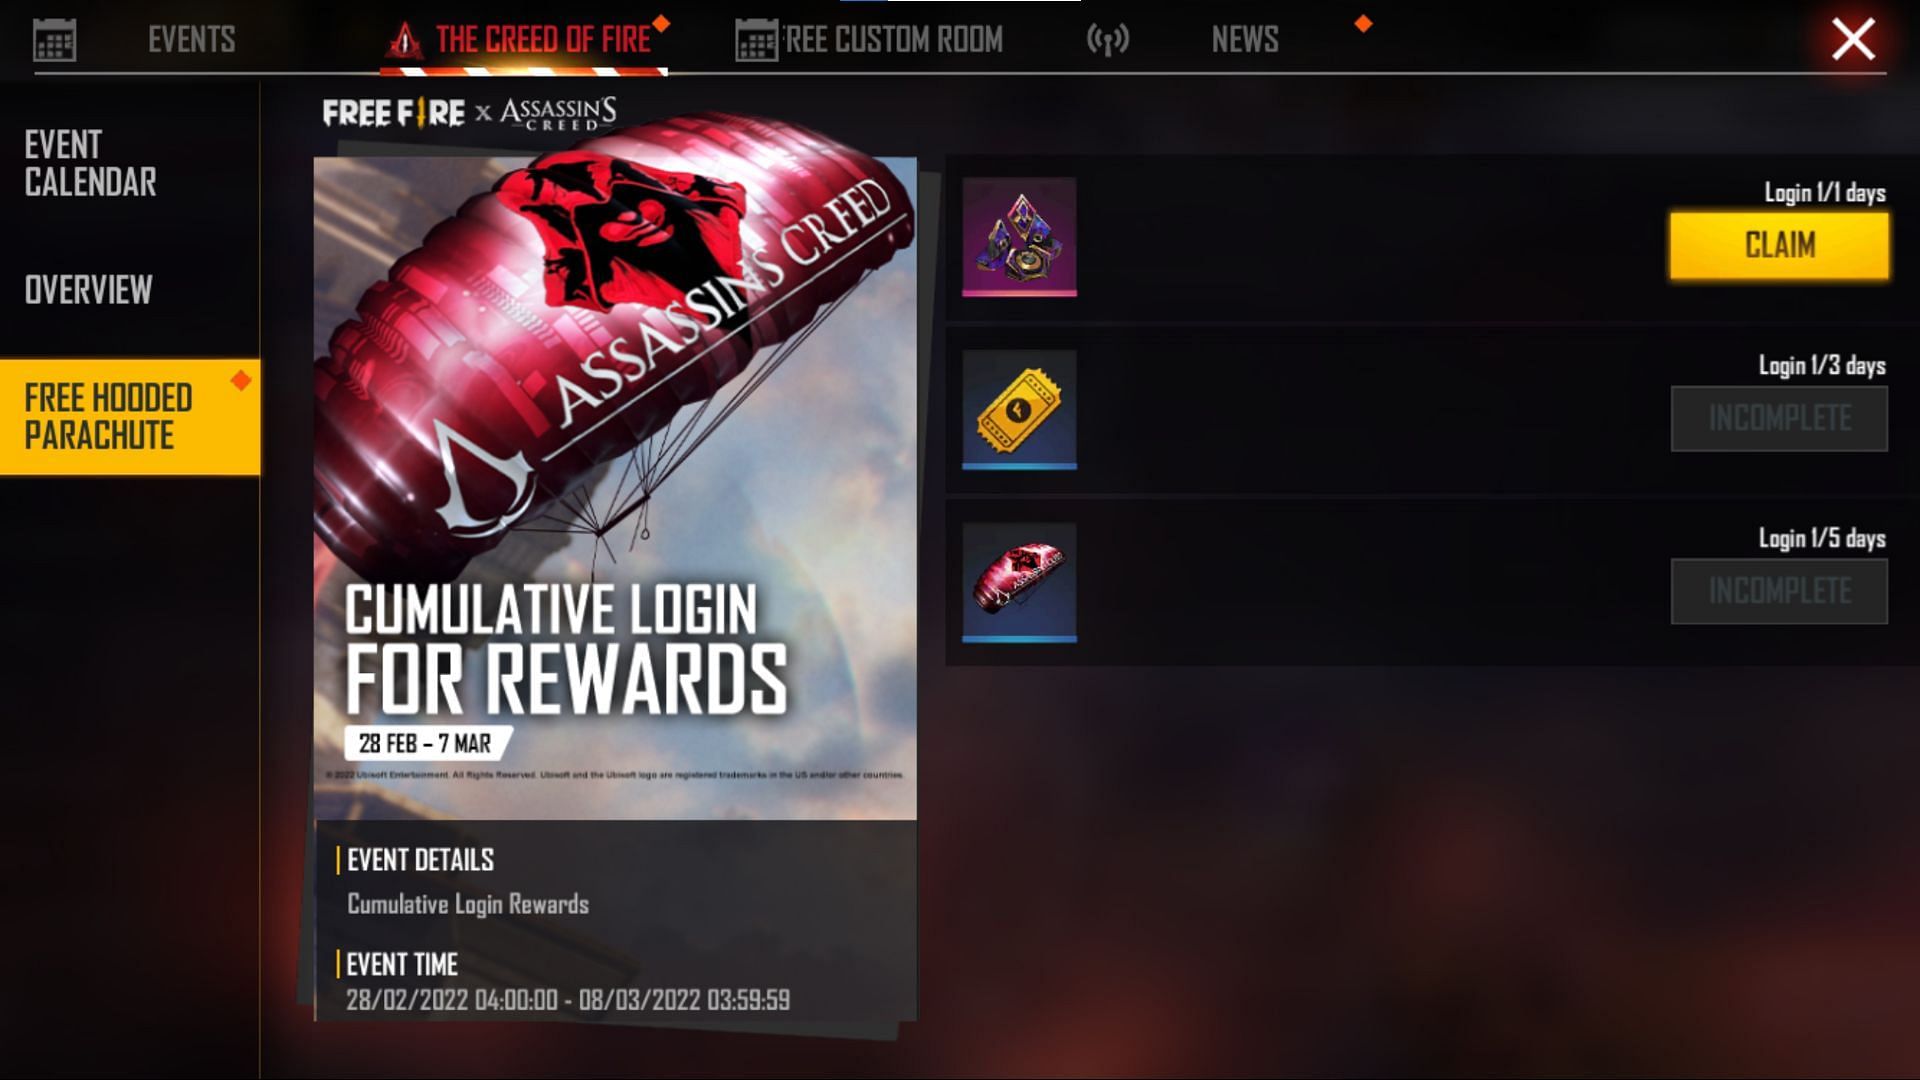 There are a total of three rewards up for grabs (Image via Garena)